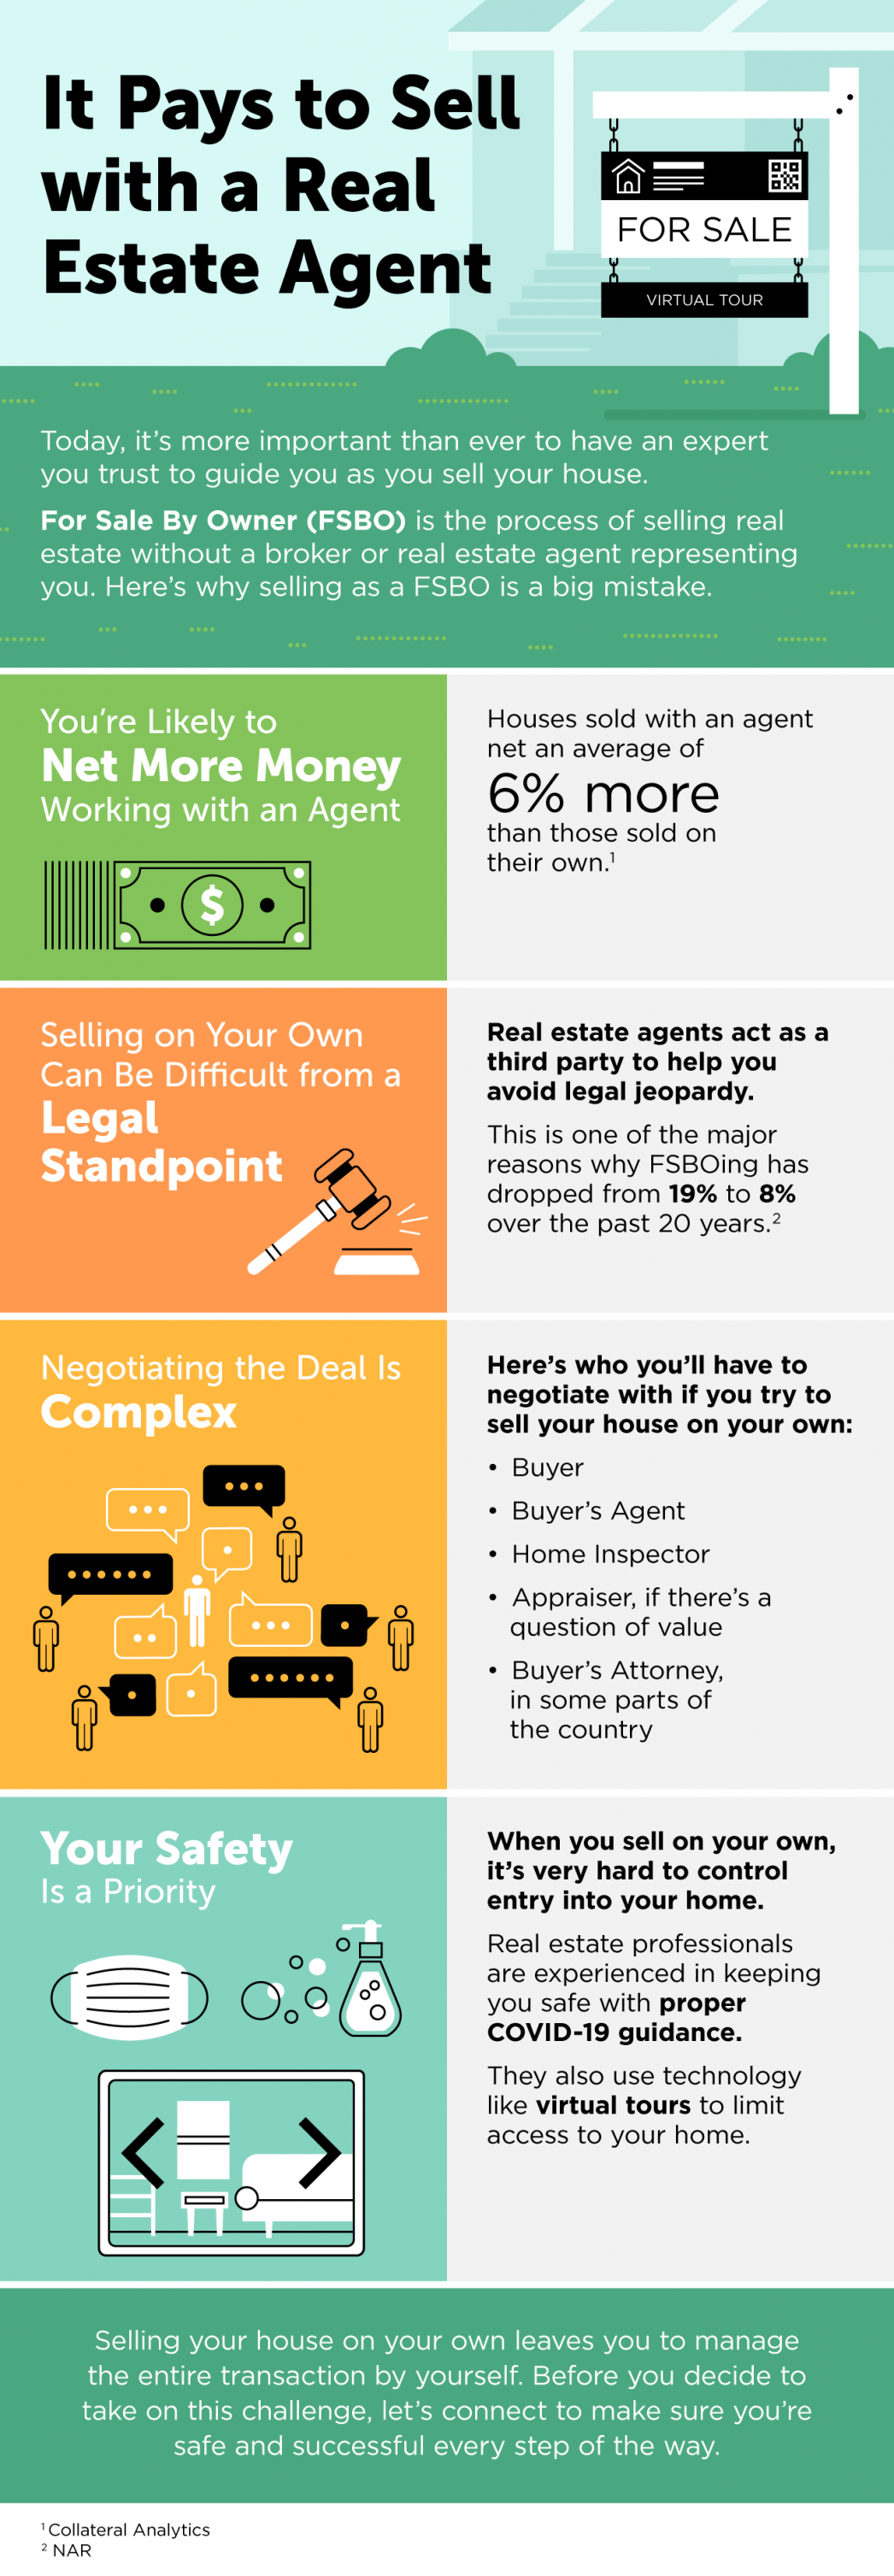 It Pays to Sell with a Real Estate Agent 